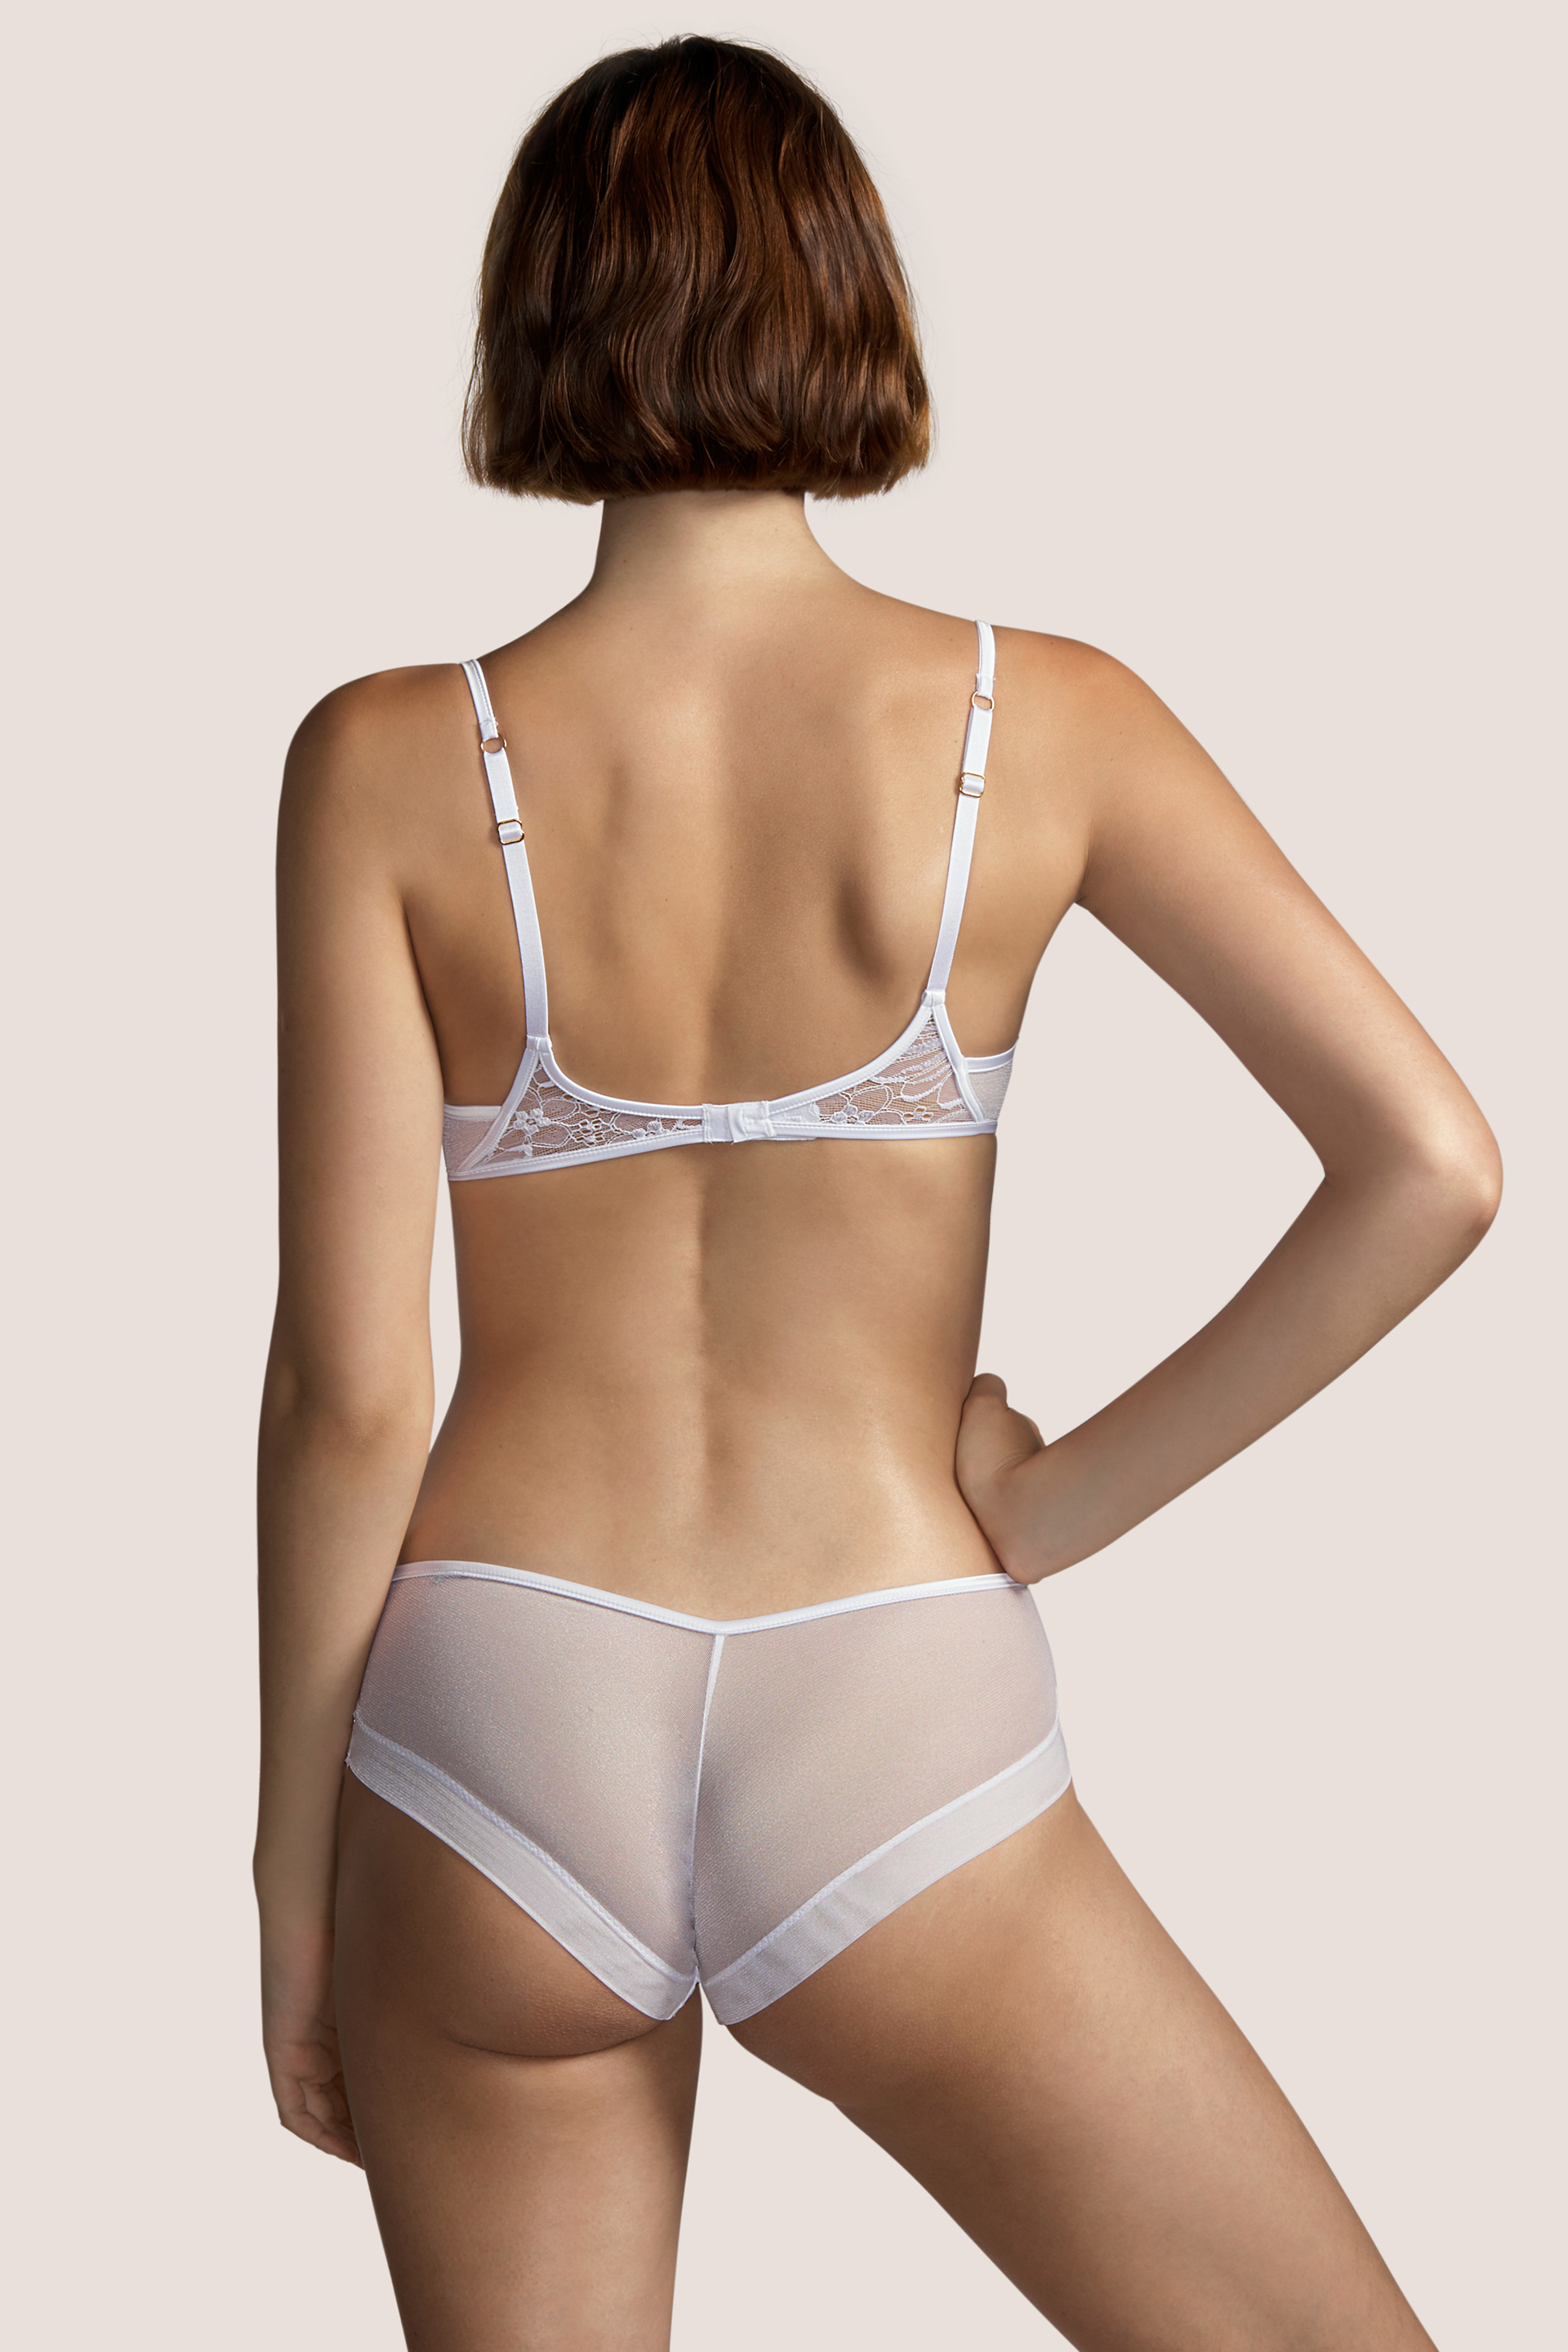 Andres Sarda TYNG white push-up bra removable pads